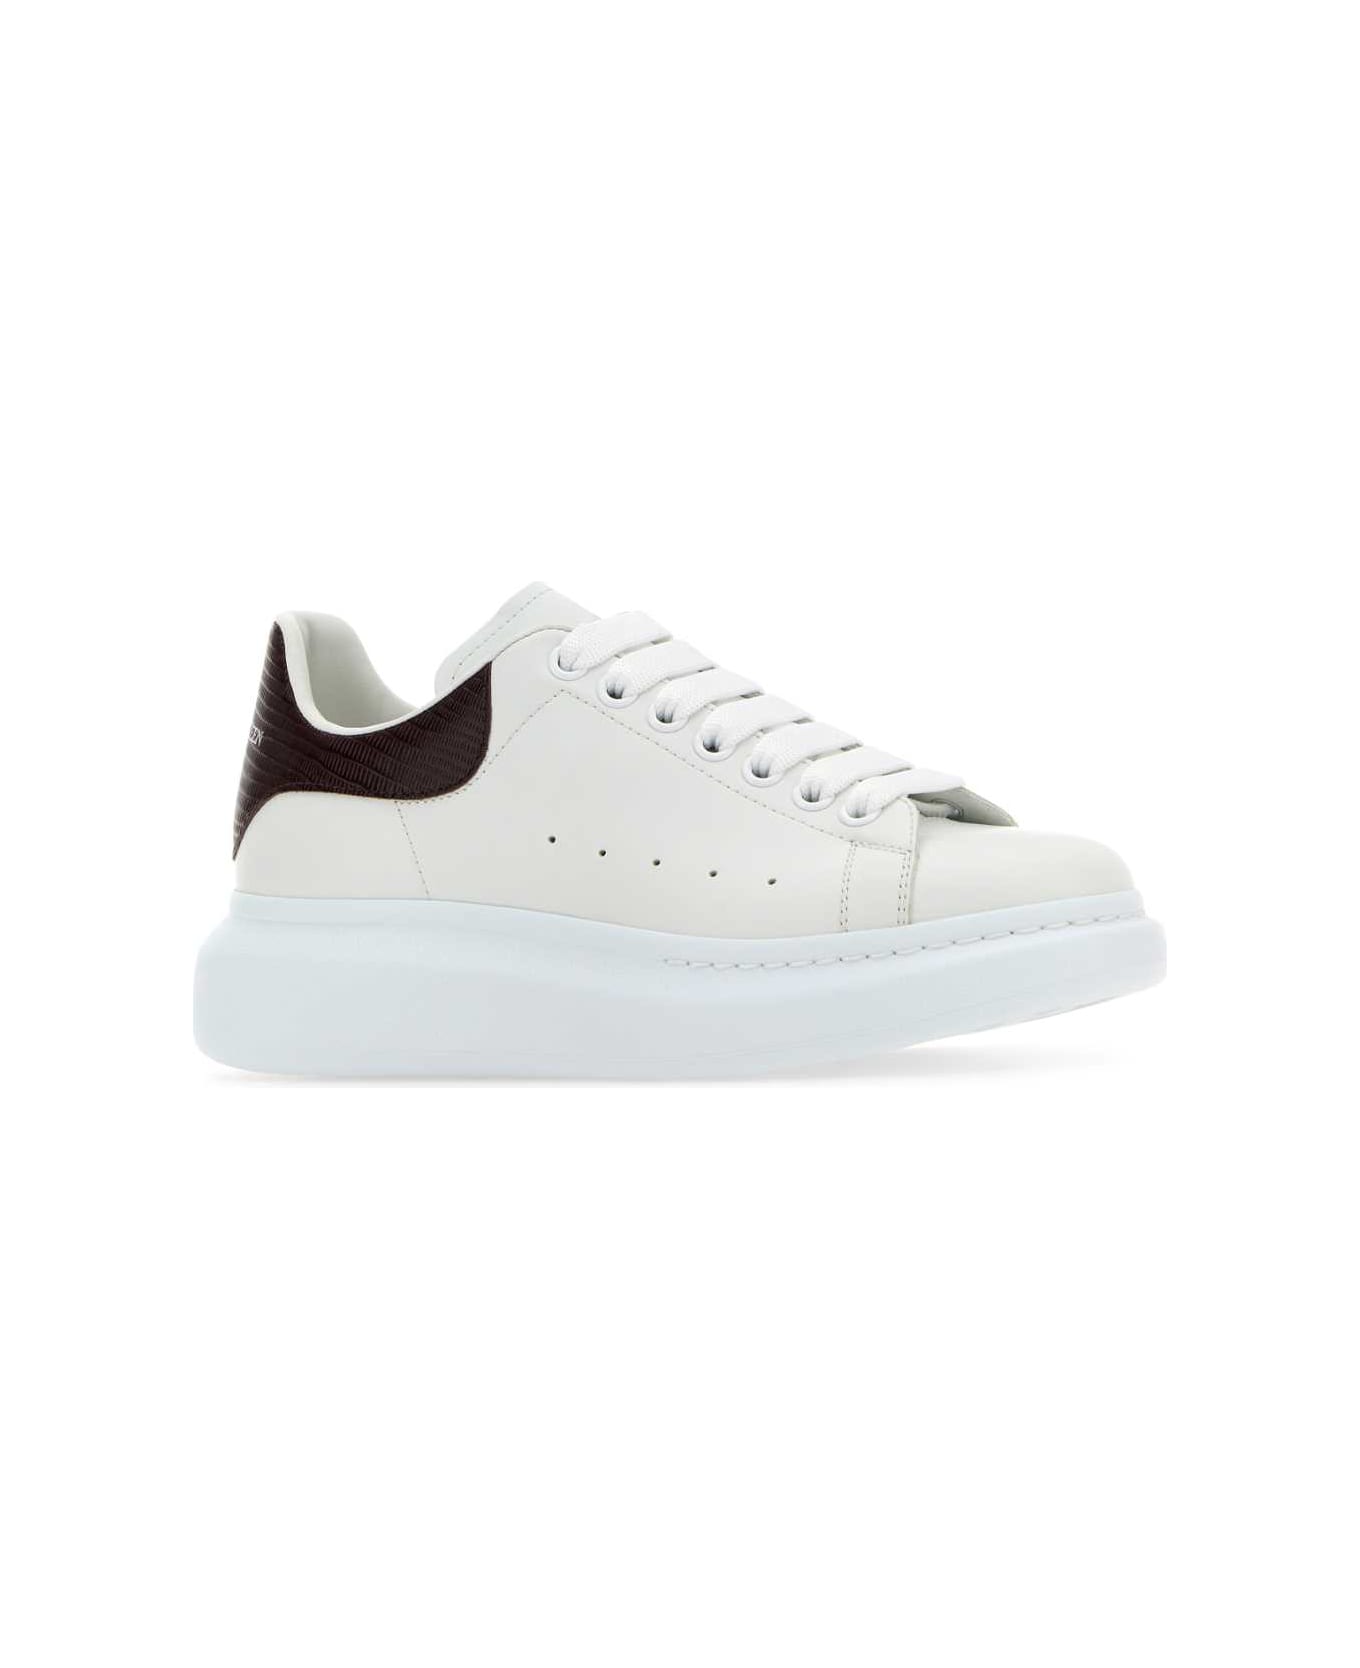 Alexander McQueen White Leather Sneakers With Burgundy Leather Heel - WHITEBURGUNDY スニーカー